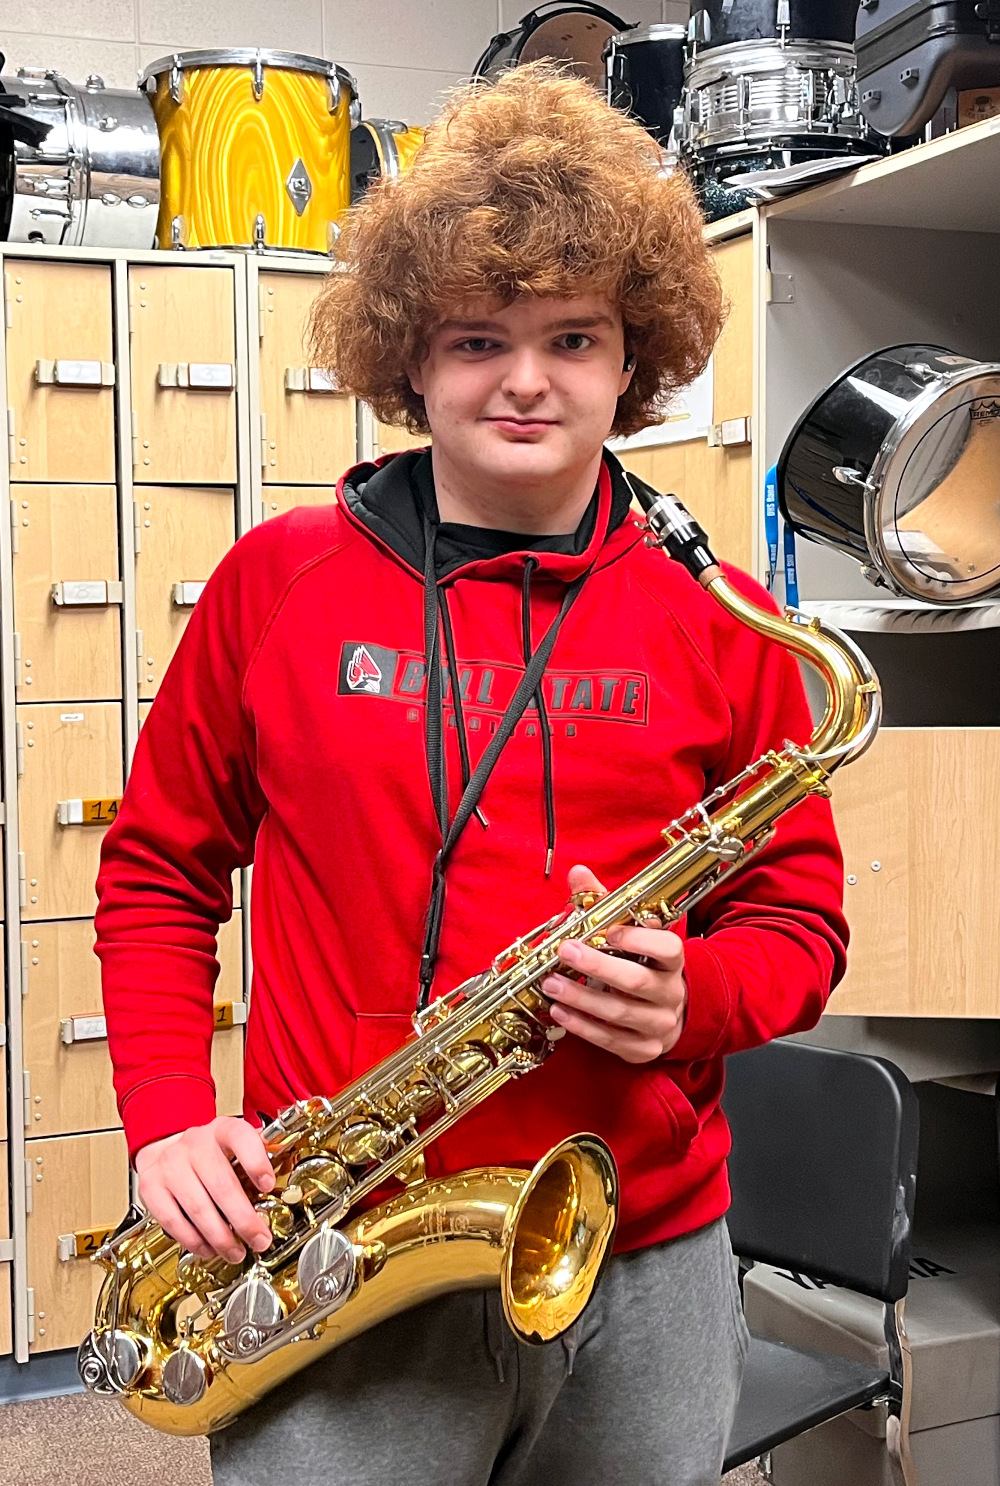 Band member with saxophone